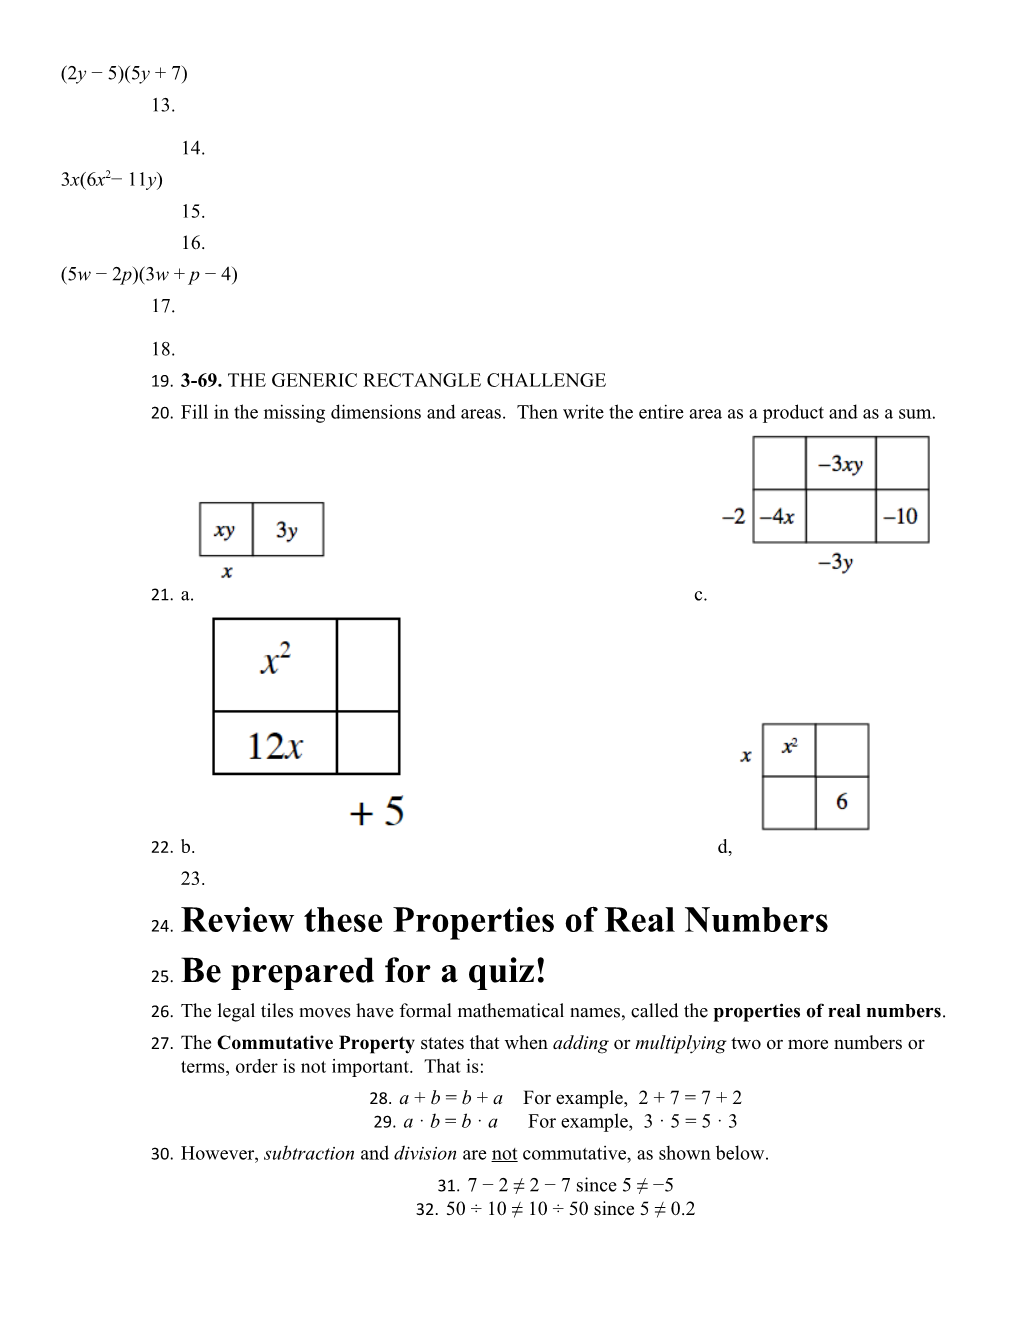 3.2.4 Using Generic Rectangles to Multiply